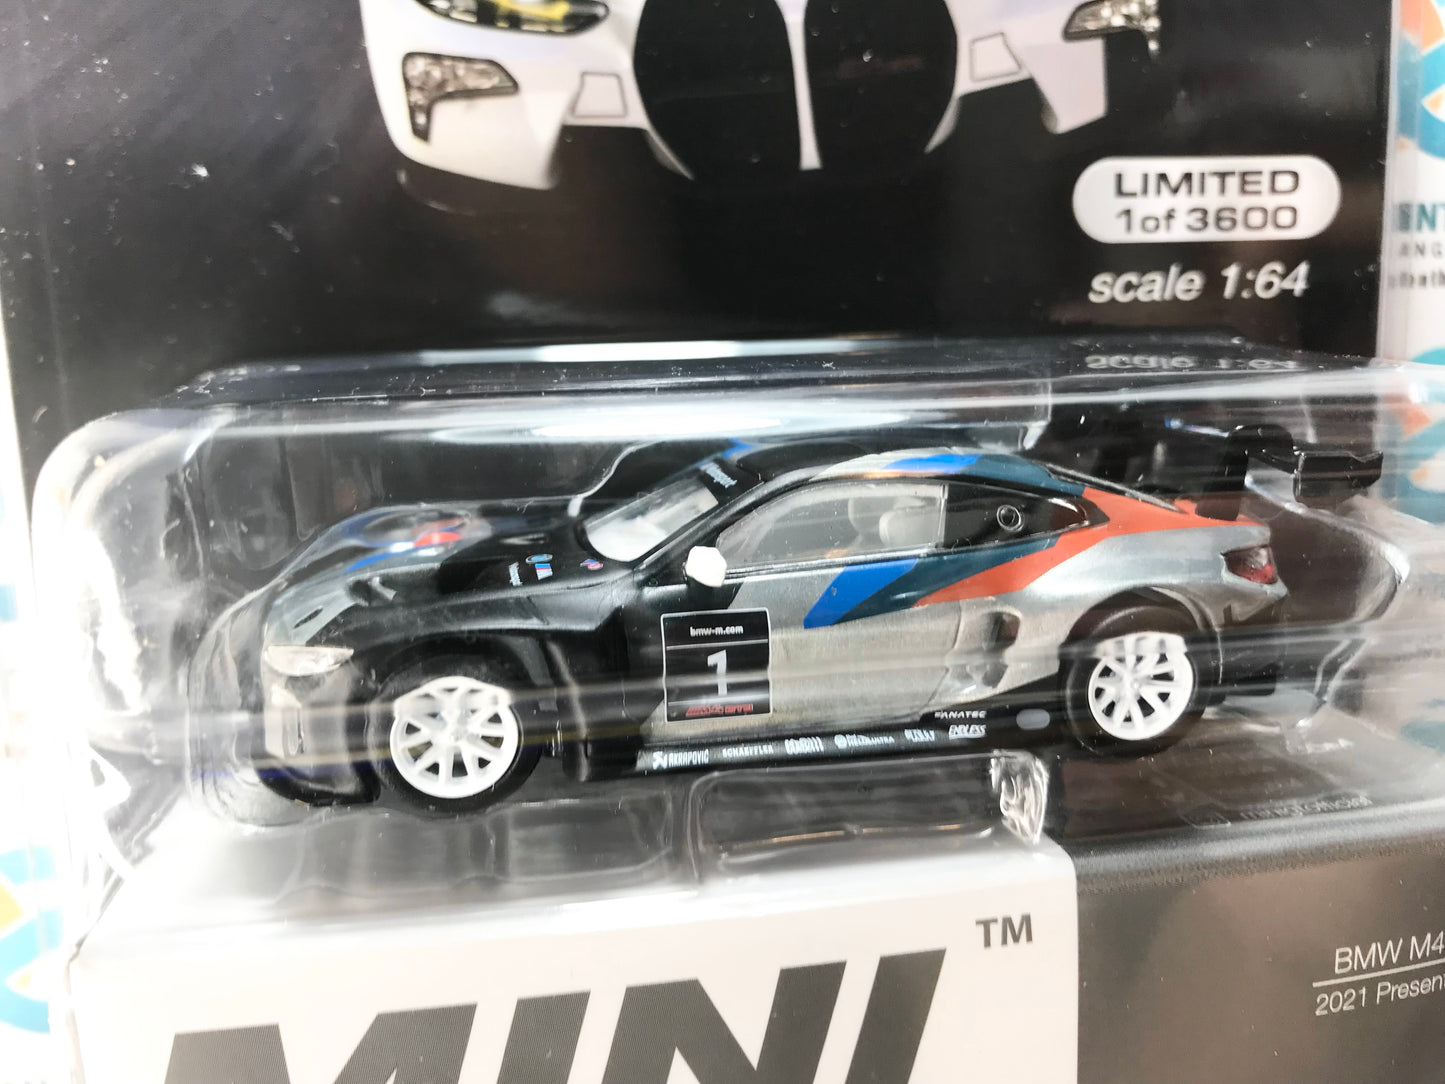 CHASE Mini GT Mijo Exclusives 347 BMW M4 GT3 2021 Presentation 1:64